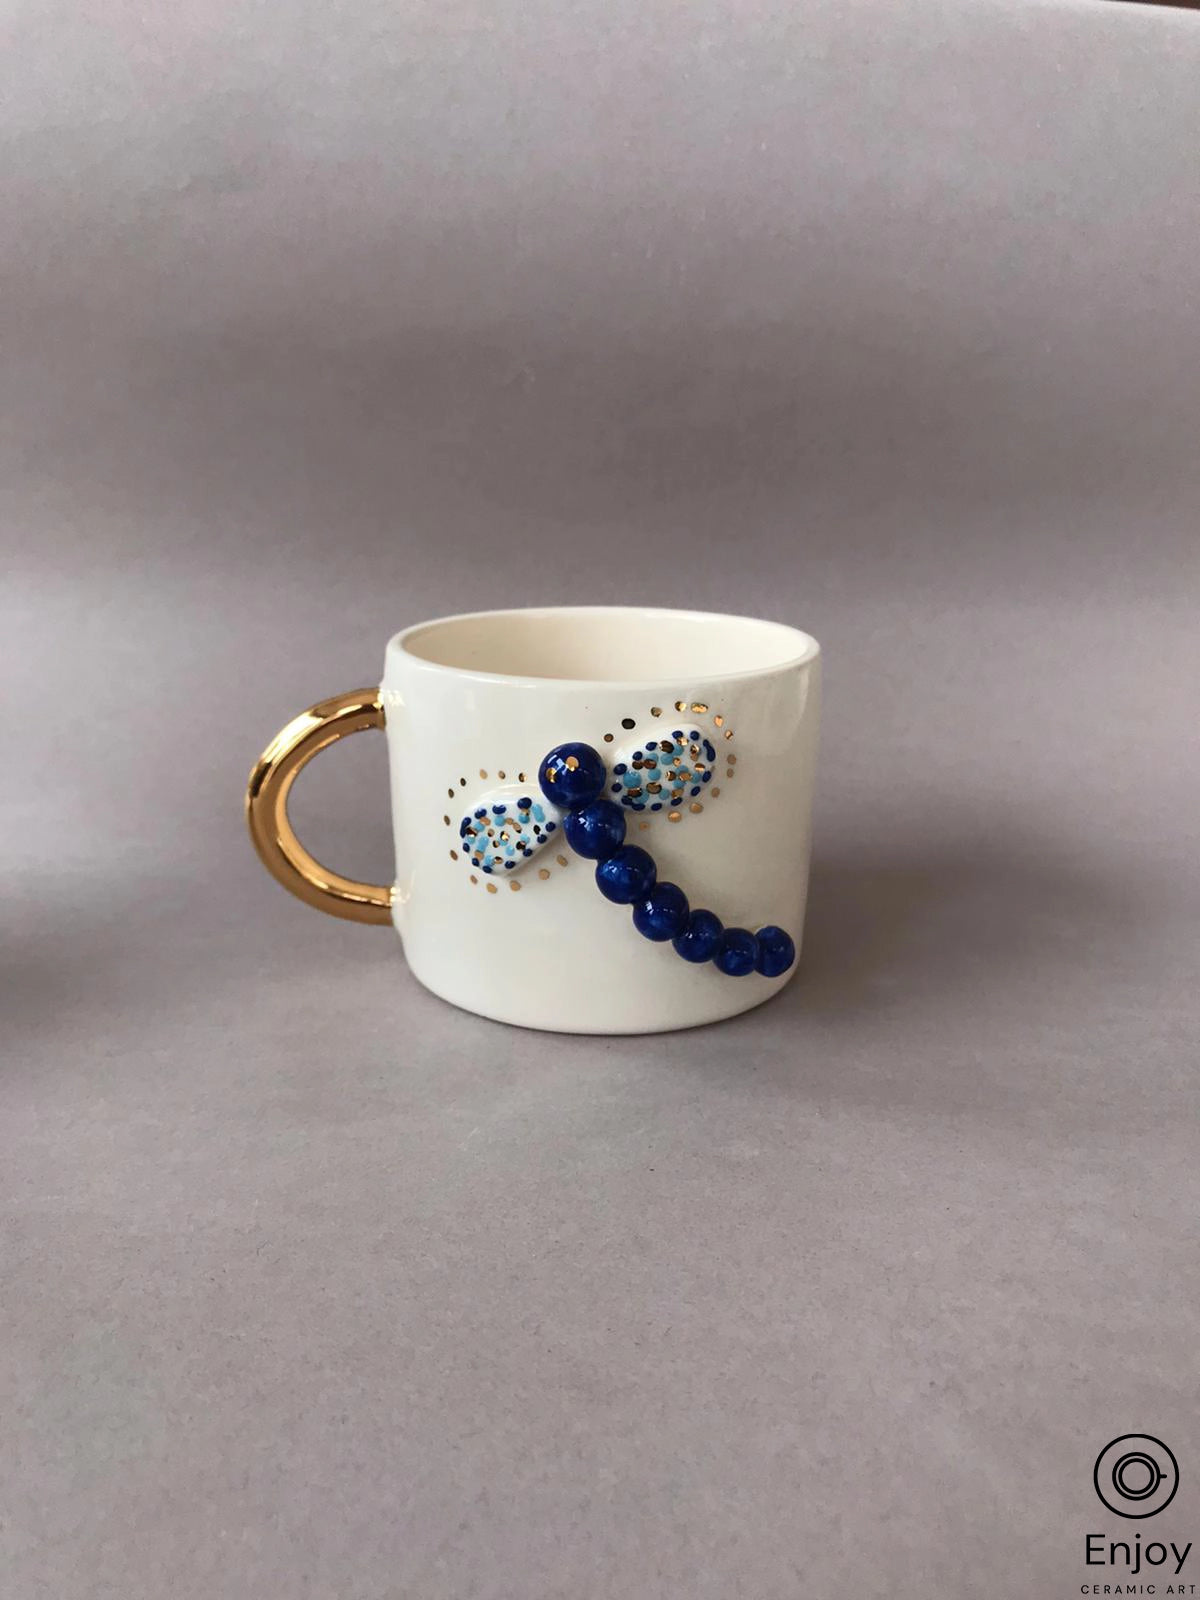 Handcrafted 'Blue Dragonfly Handmade Ceramic Coffee Mug' with a gold handle, displayed on a lavender background for a simple and elegant presentation.